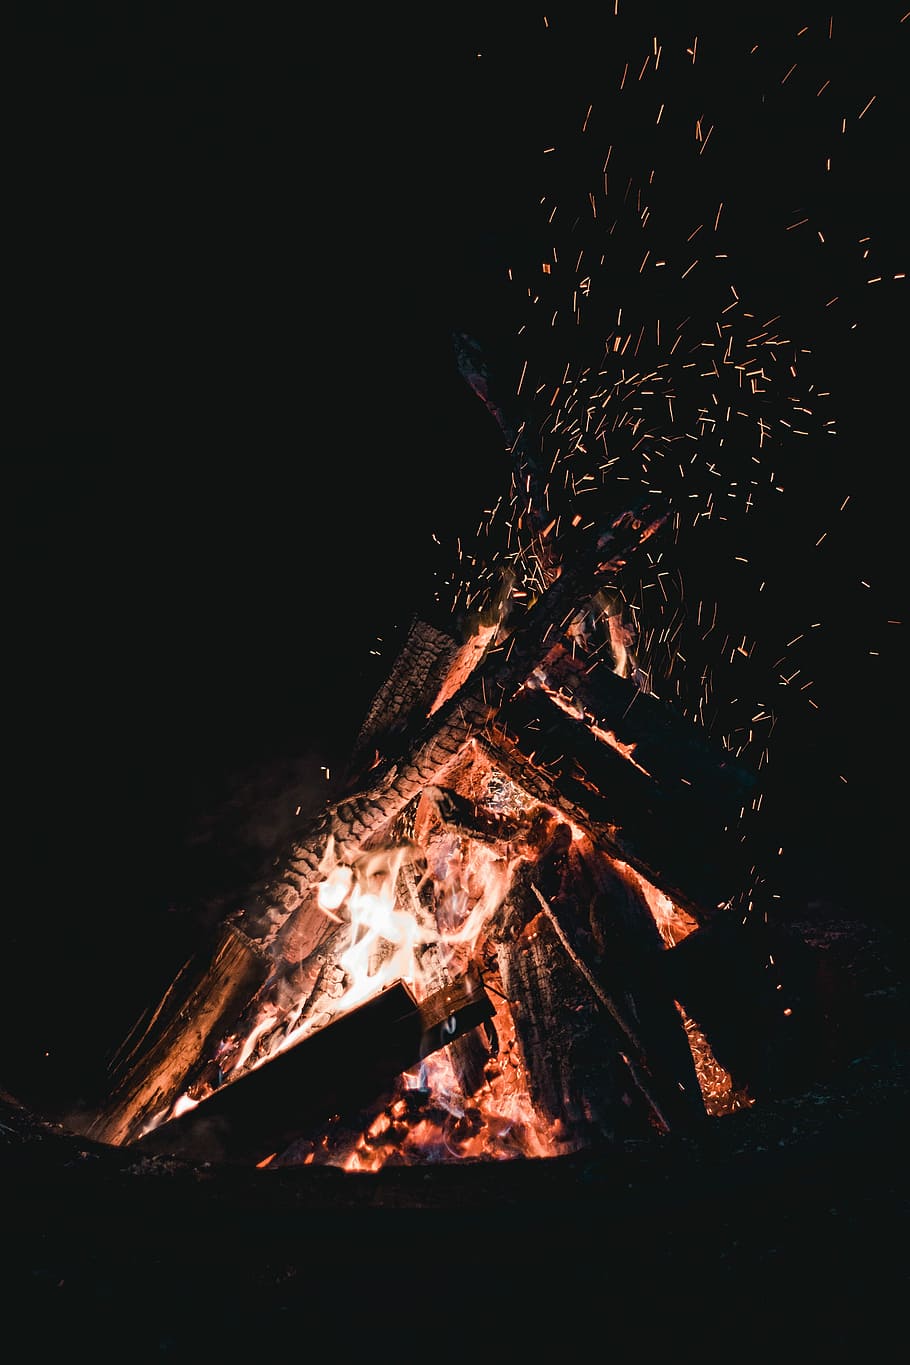 67+ Campfire Wallpapers: HD, 4K, 5K for PC and Mobile | Download free  images for iPhone, Android